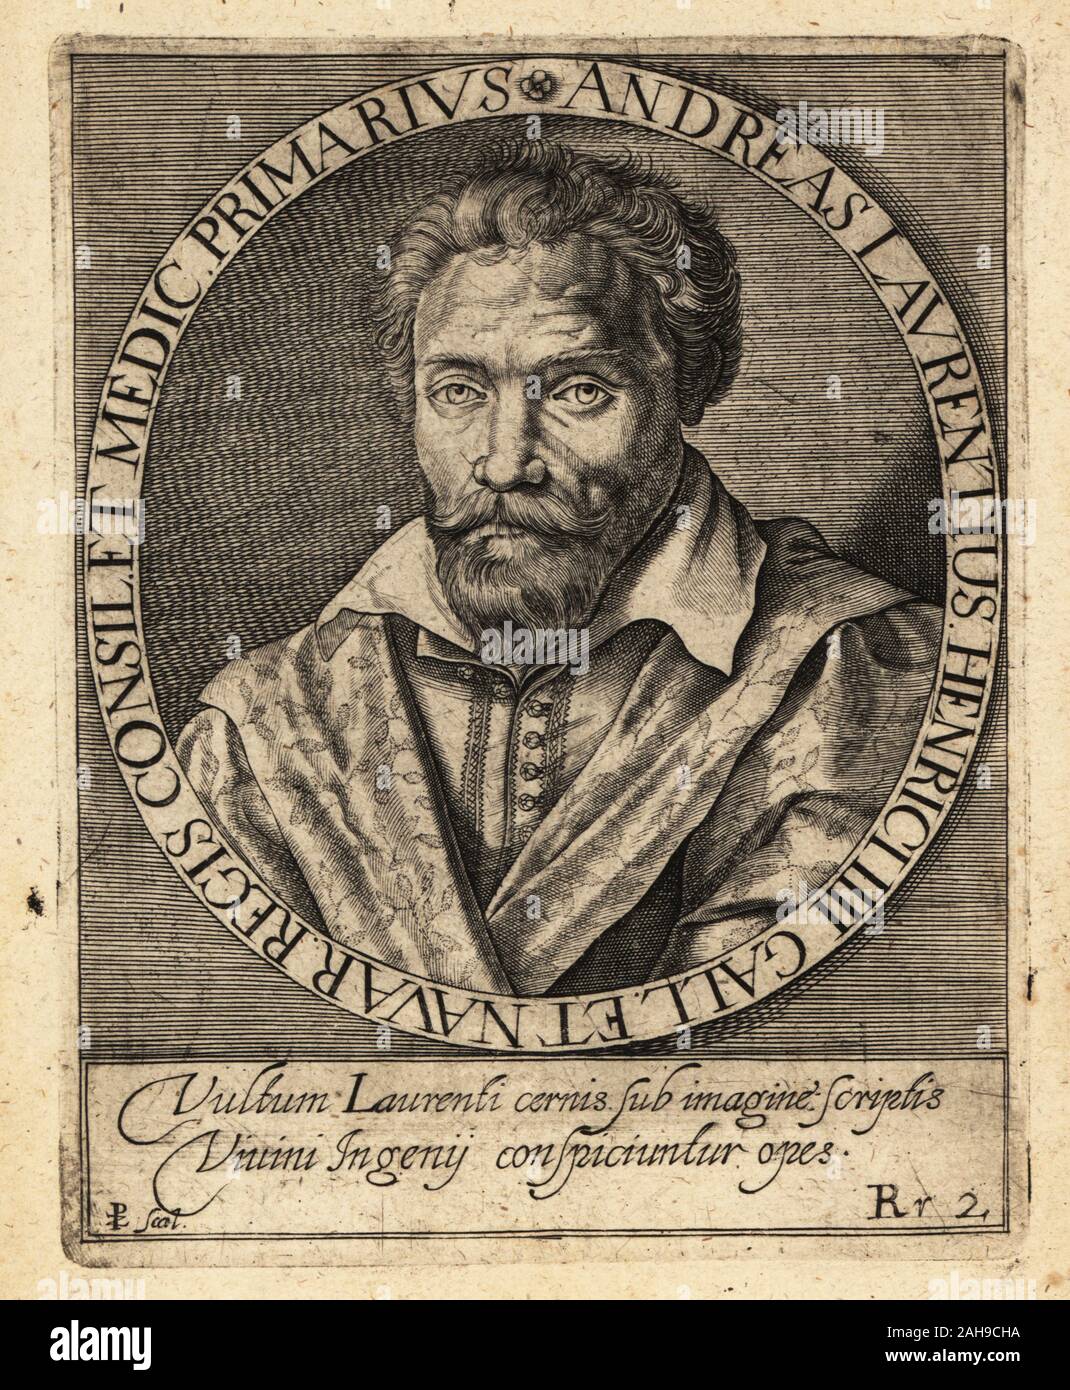 Andre du Laurens, French physician to King Henry IV, 1558-1609. Andreas Lavrentius, Henrici IIII Gall et Navar Regis Consilet Medicus Primarius. Copperplate engraving by Johann Theodore de Bry from Jean-Jacques Boissard’s Bibliotheca Chalcographica, Johann Ammonius, Frankfurt, 1650. Stock Photo